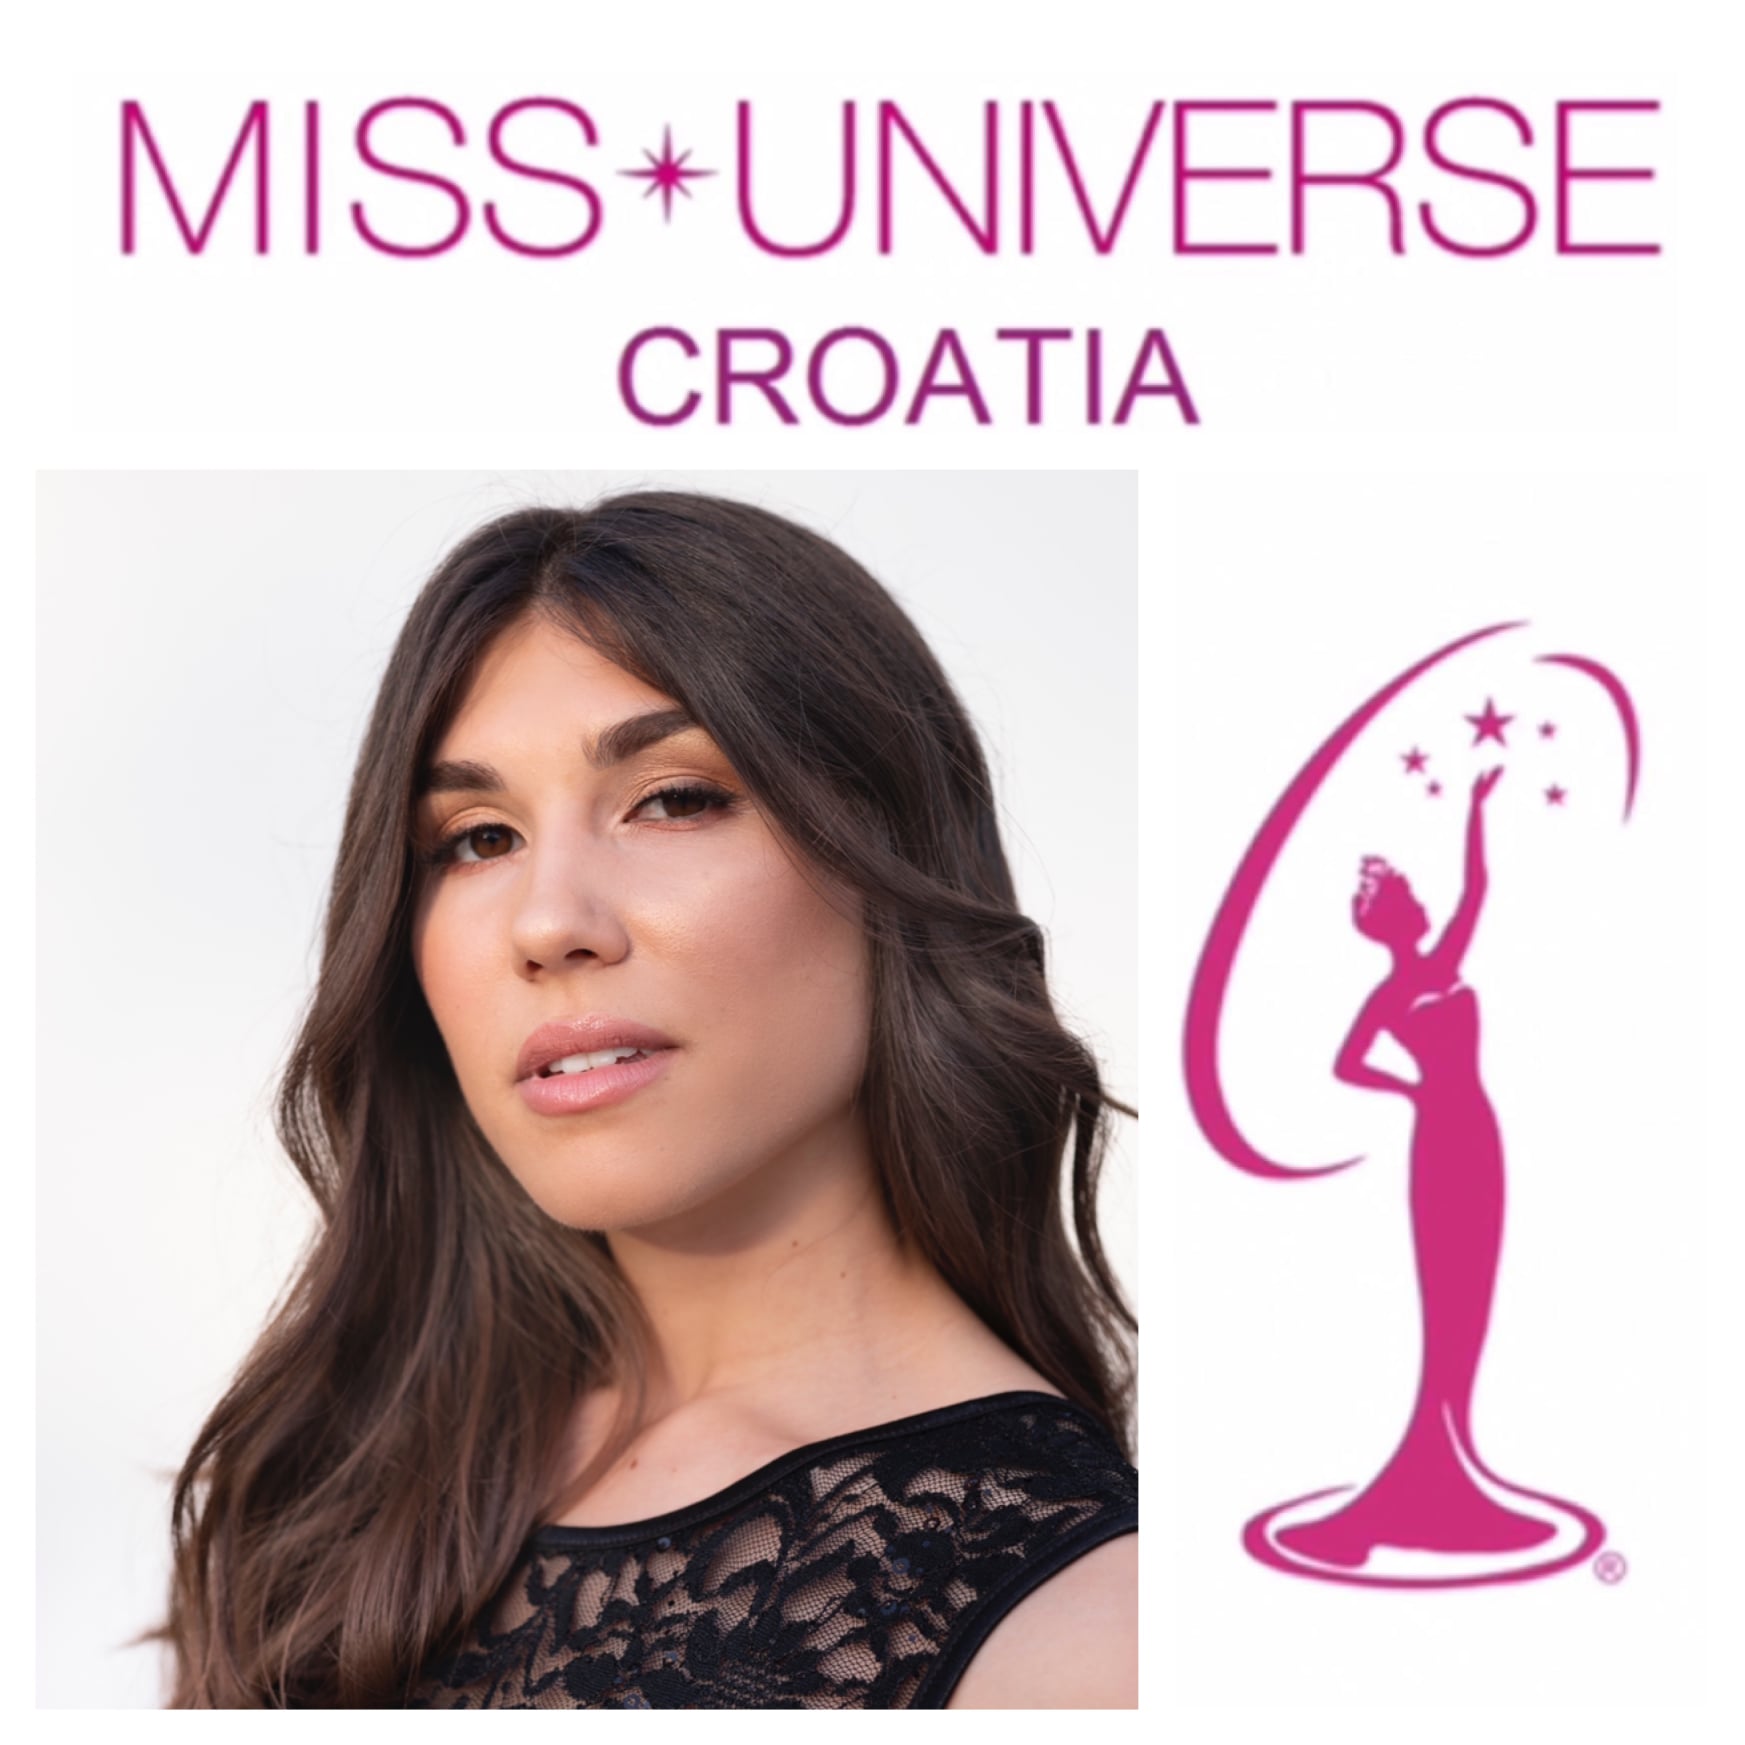 Croatia set to crown new Miss Universe - the finalists 